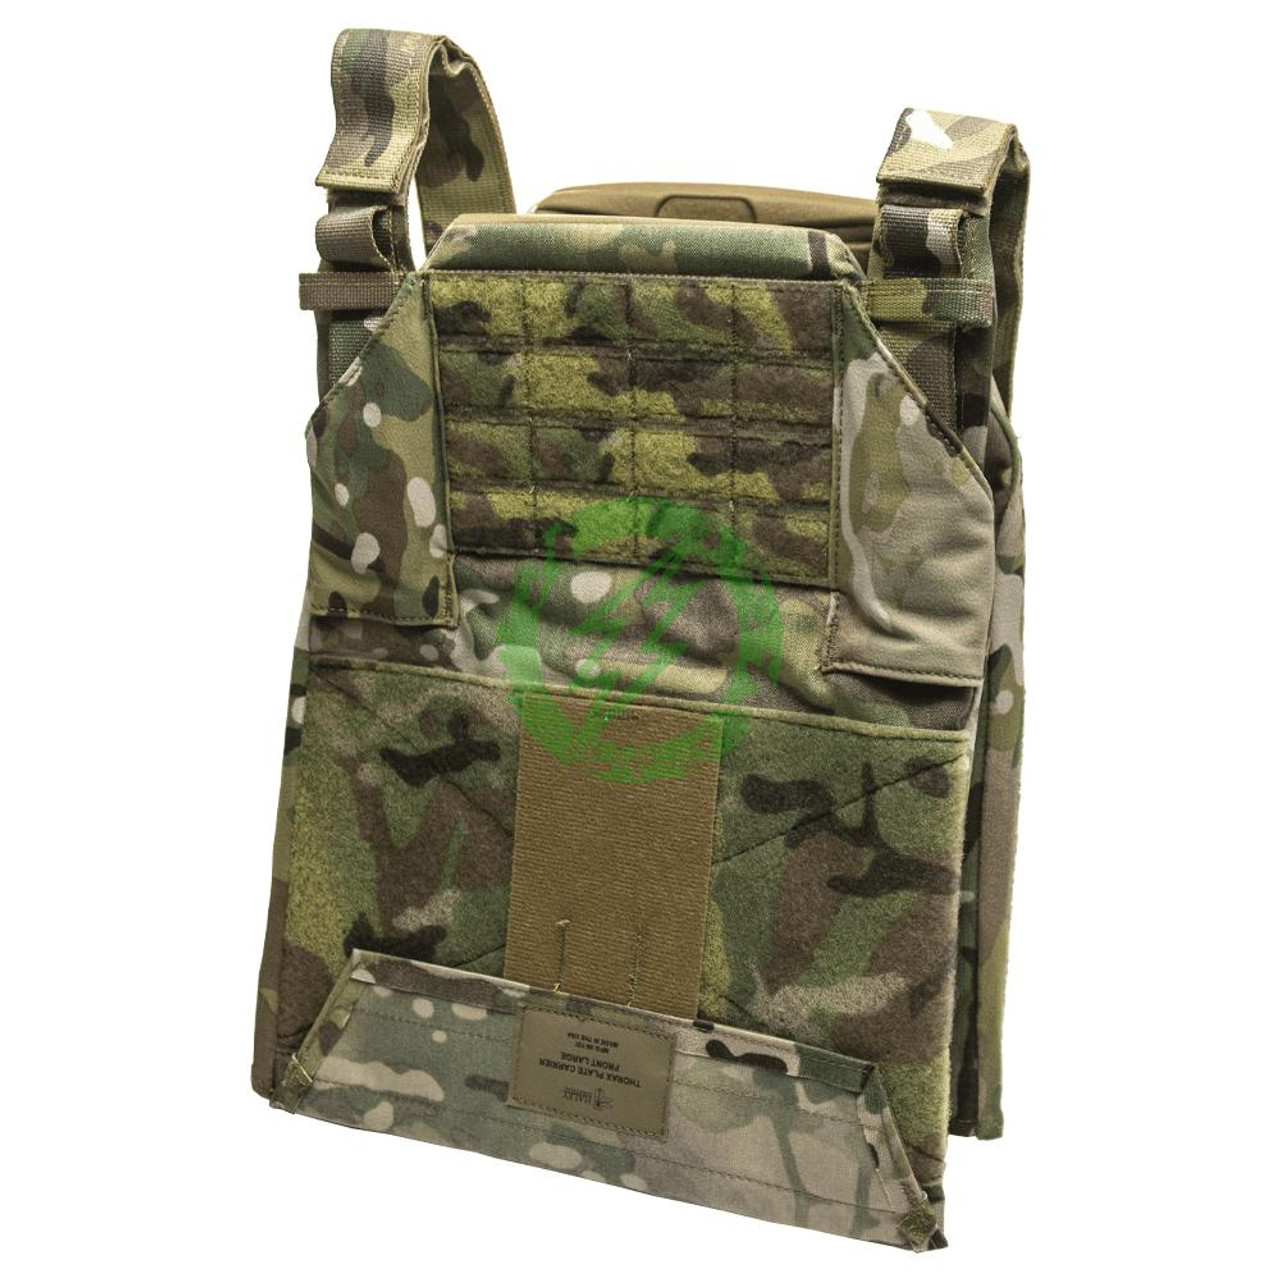  Haley Strategic Thorax Plate Carrier w/ Plate Bags | Multicam 